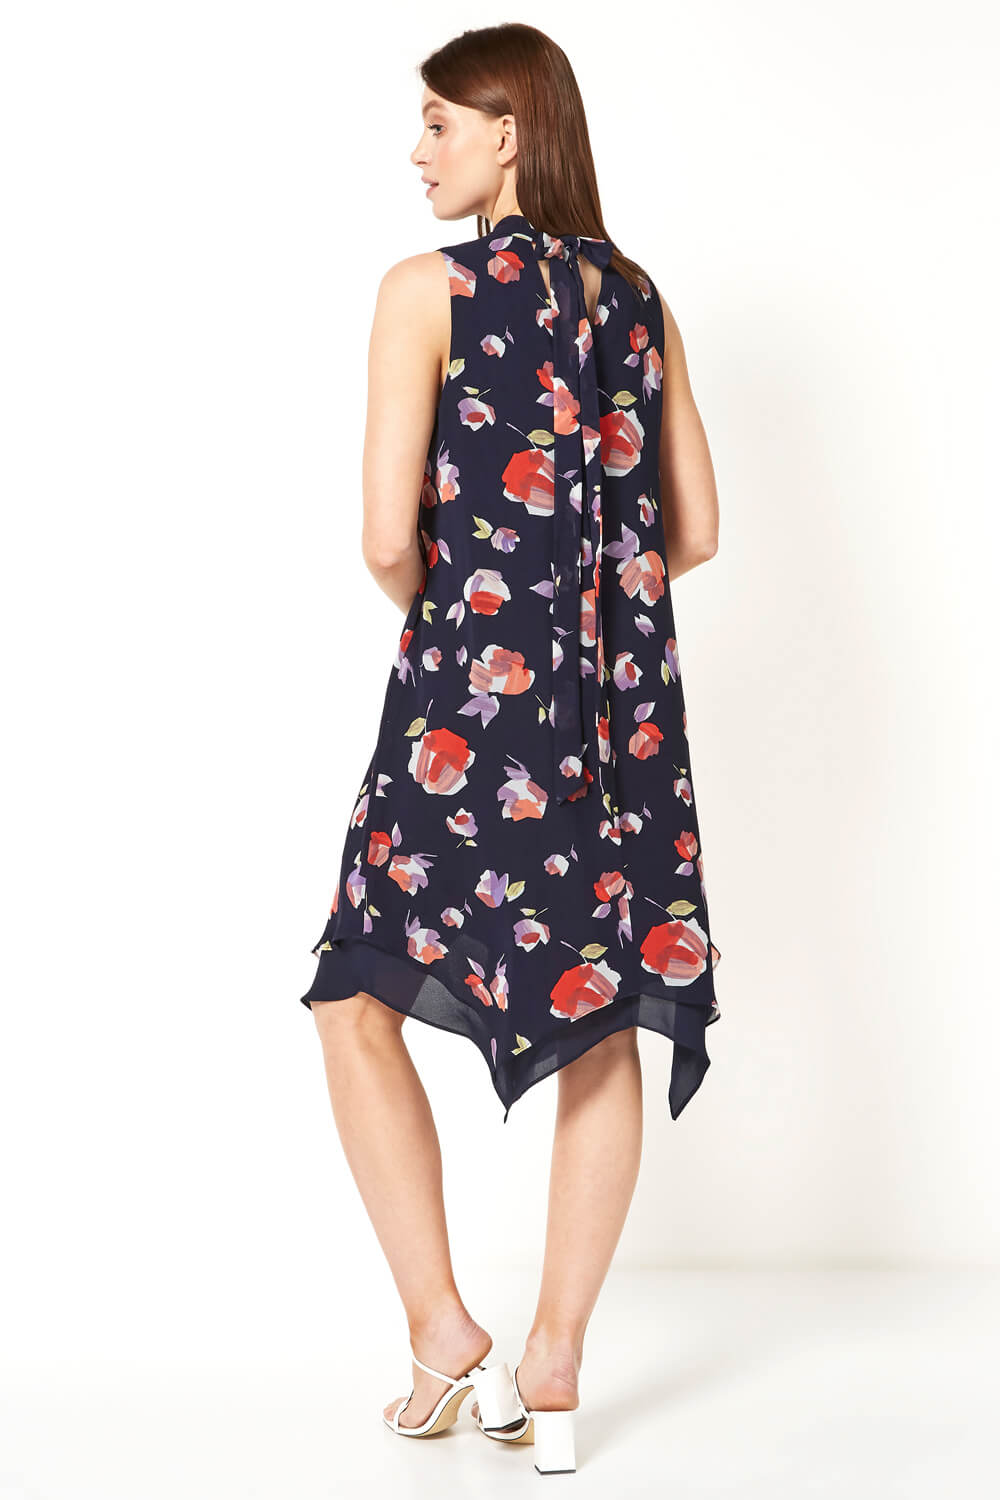 Navy  High Neck Floral Print Swing Dress, Image 3 of 5